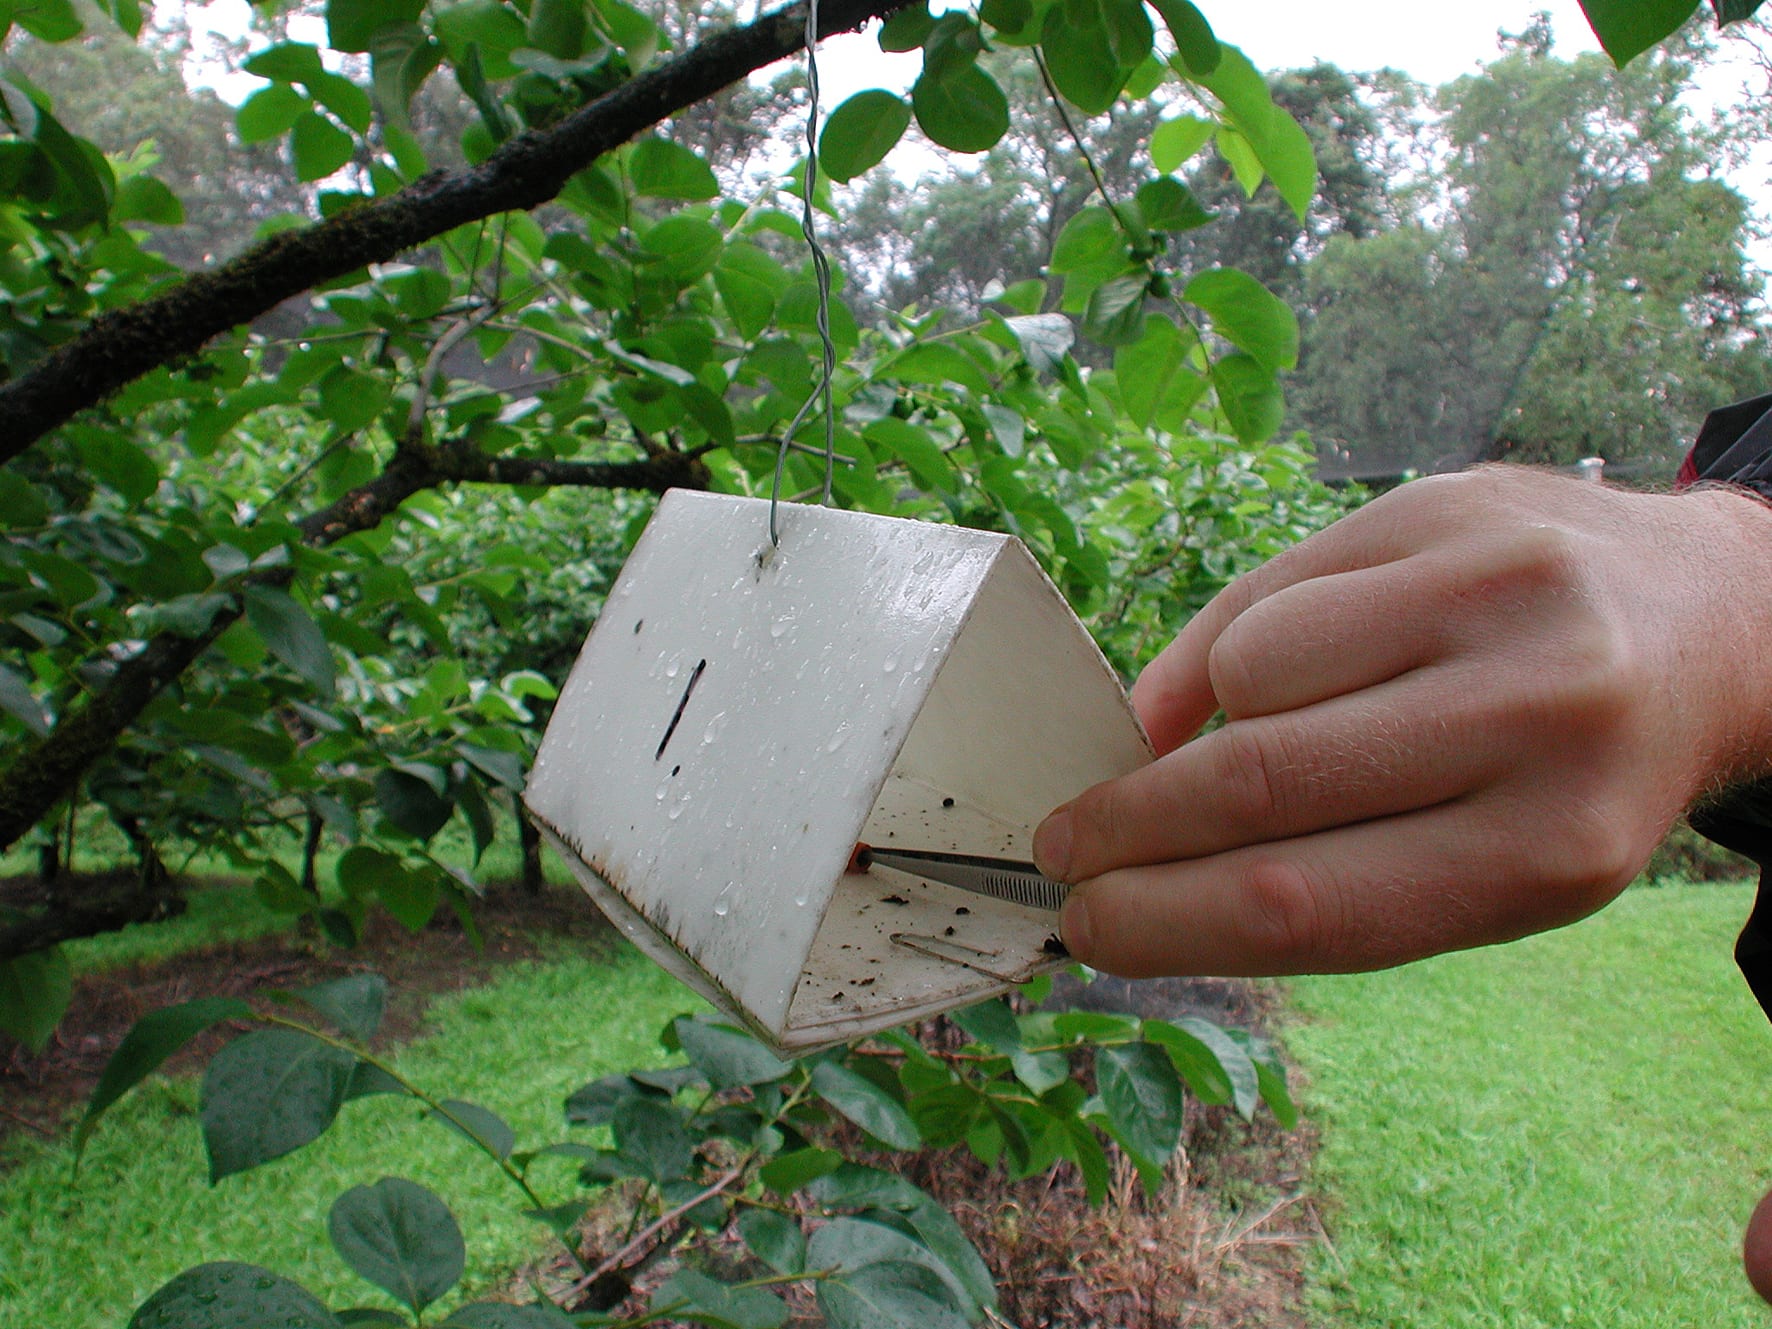 CSIRO_ScienceImage_2435_Using_Insect_Pheromones_Against_Insect_Infestation